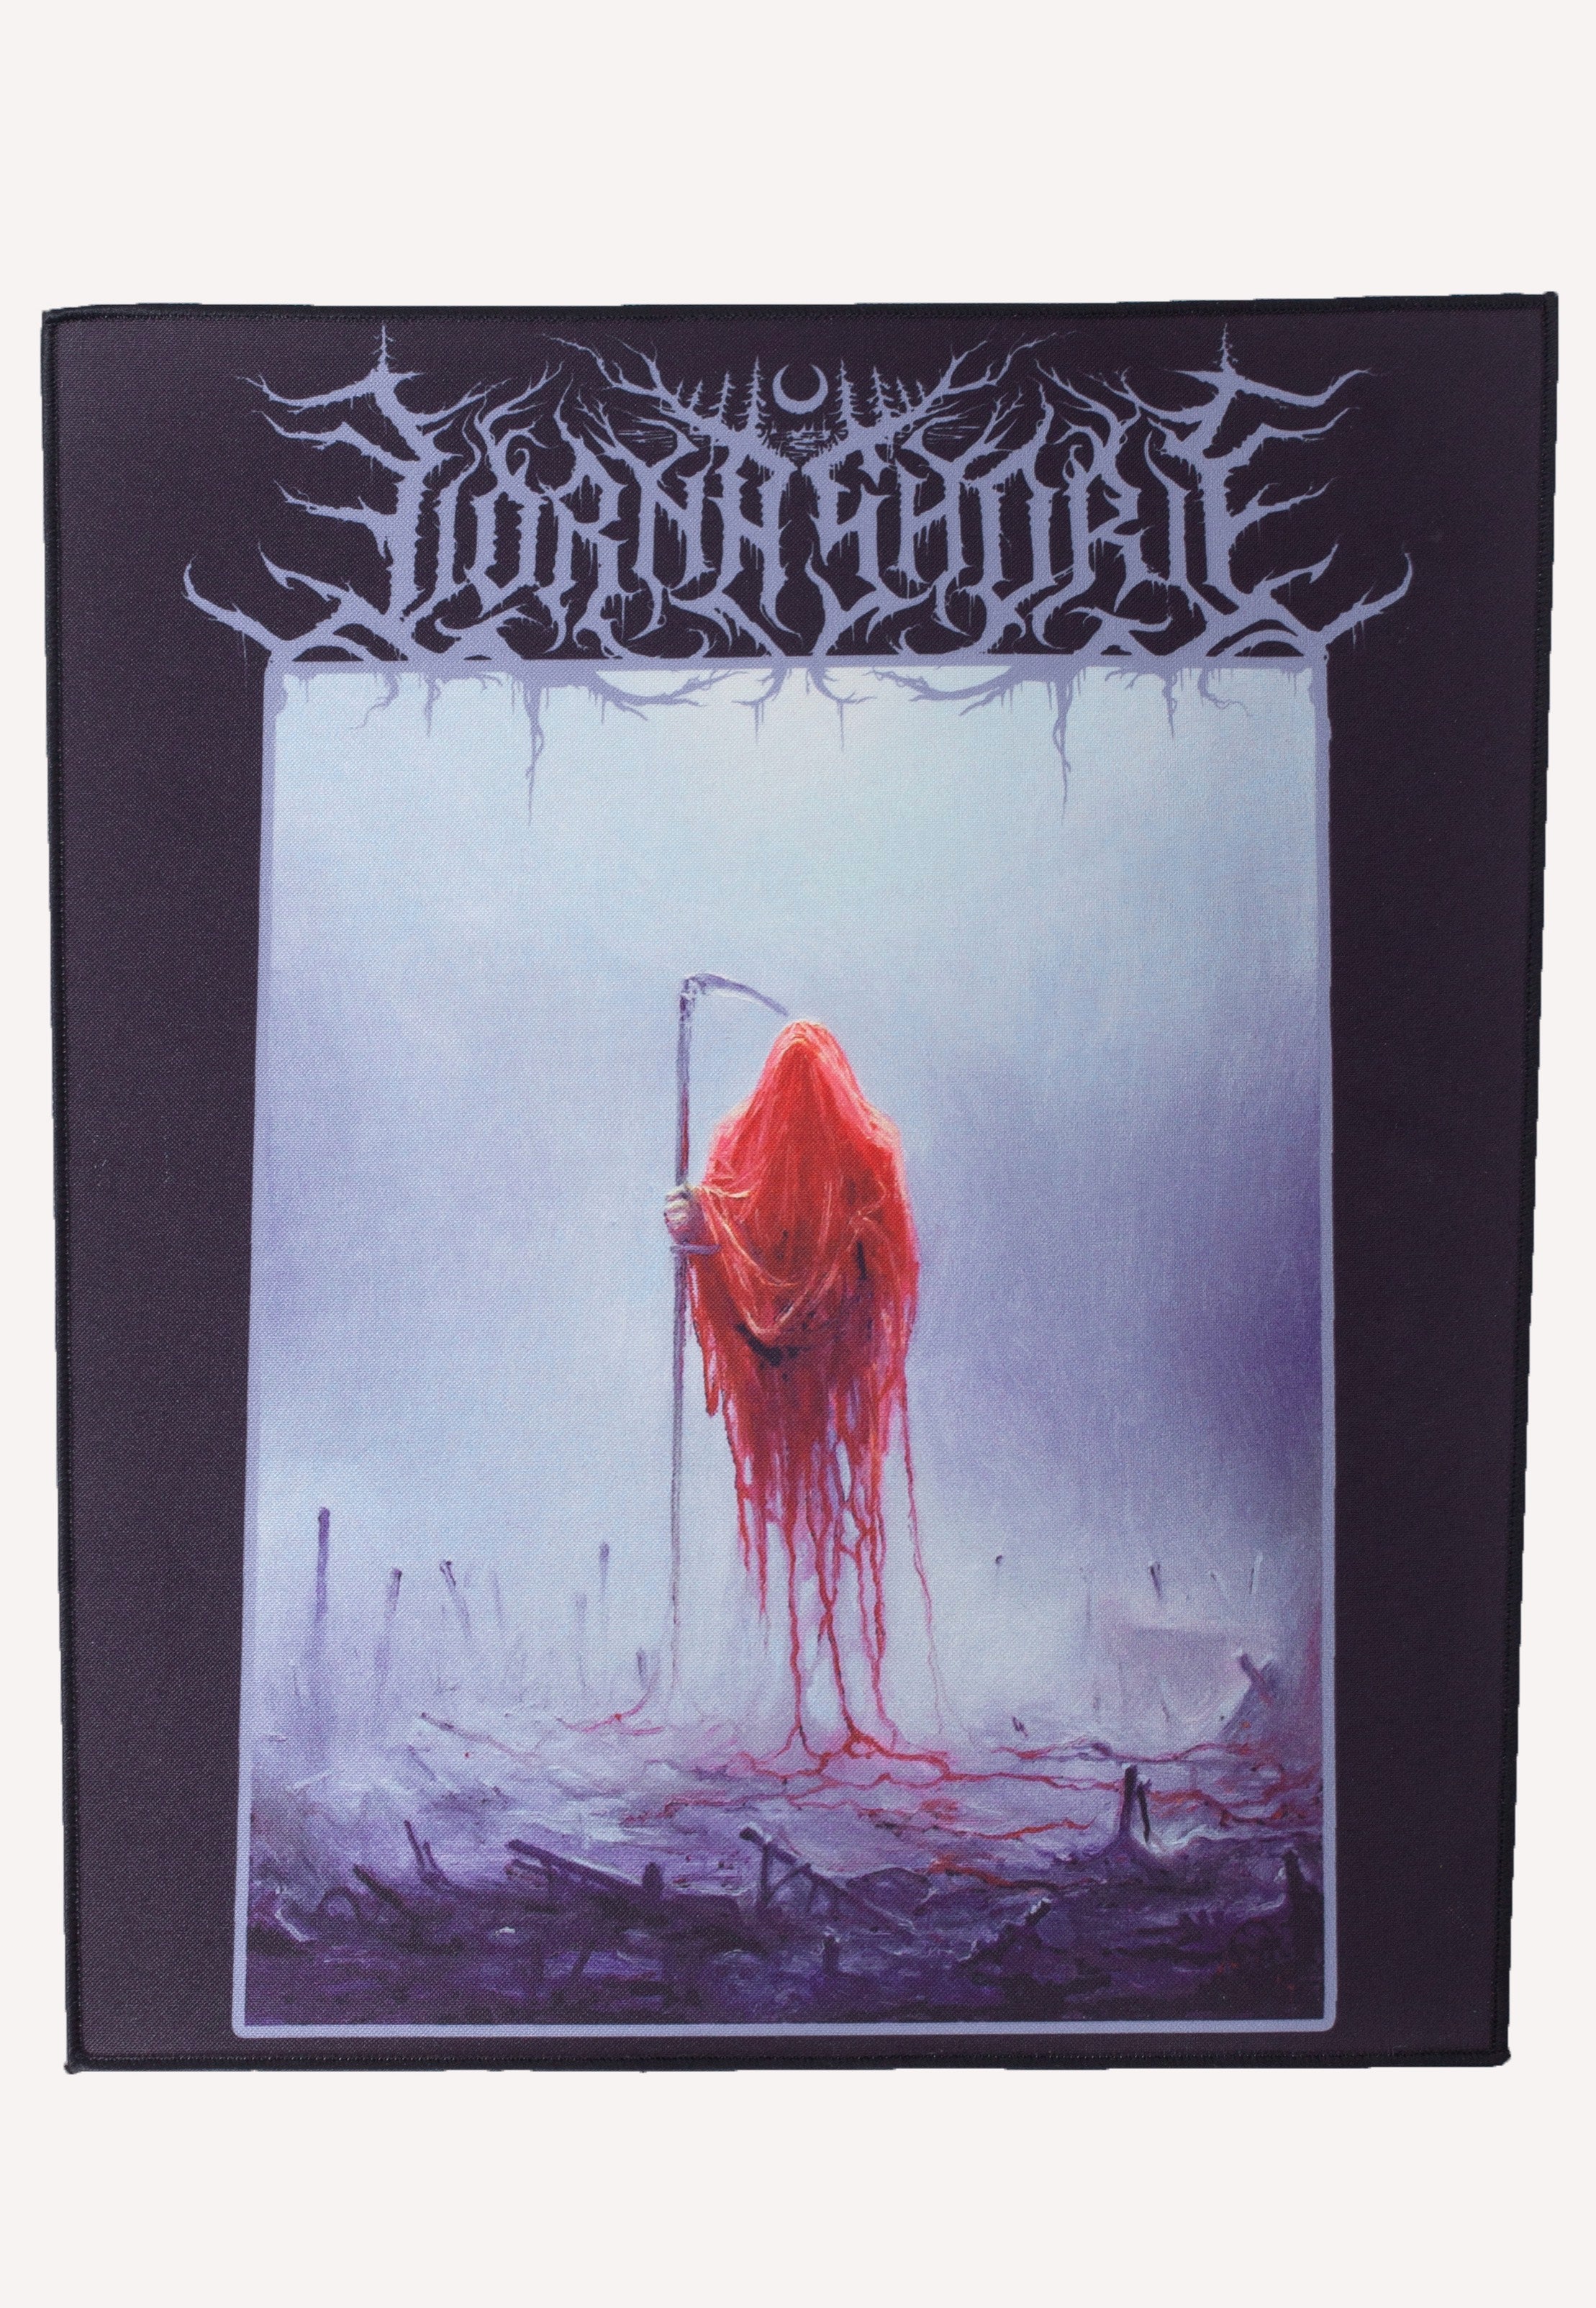 Lorna Shore - And I Return To Nothingness - Backpatch | Neutral-Image